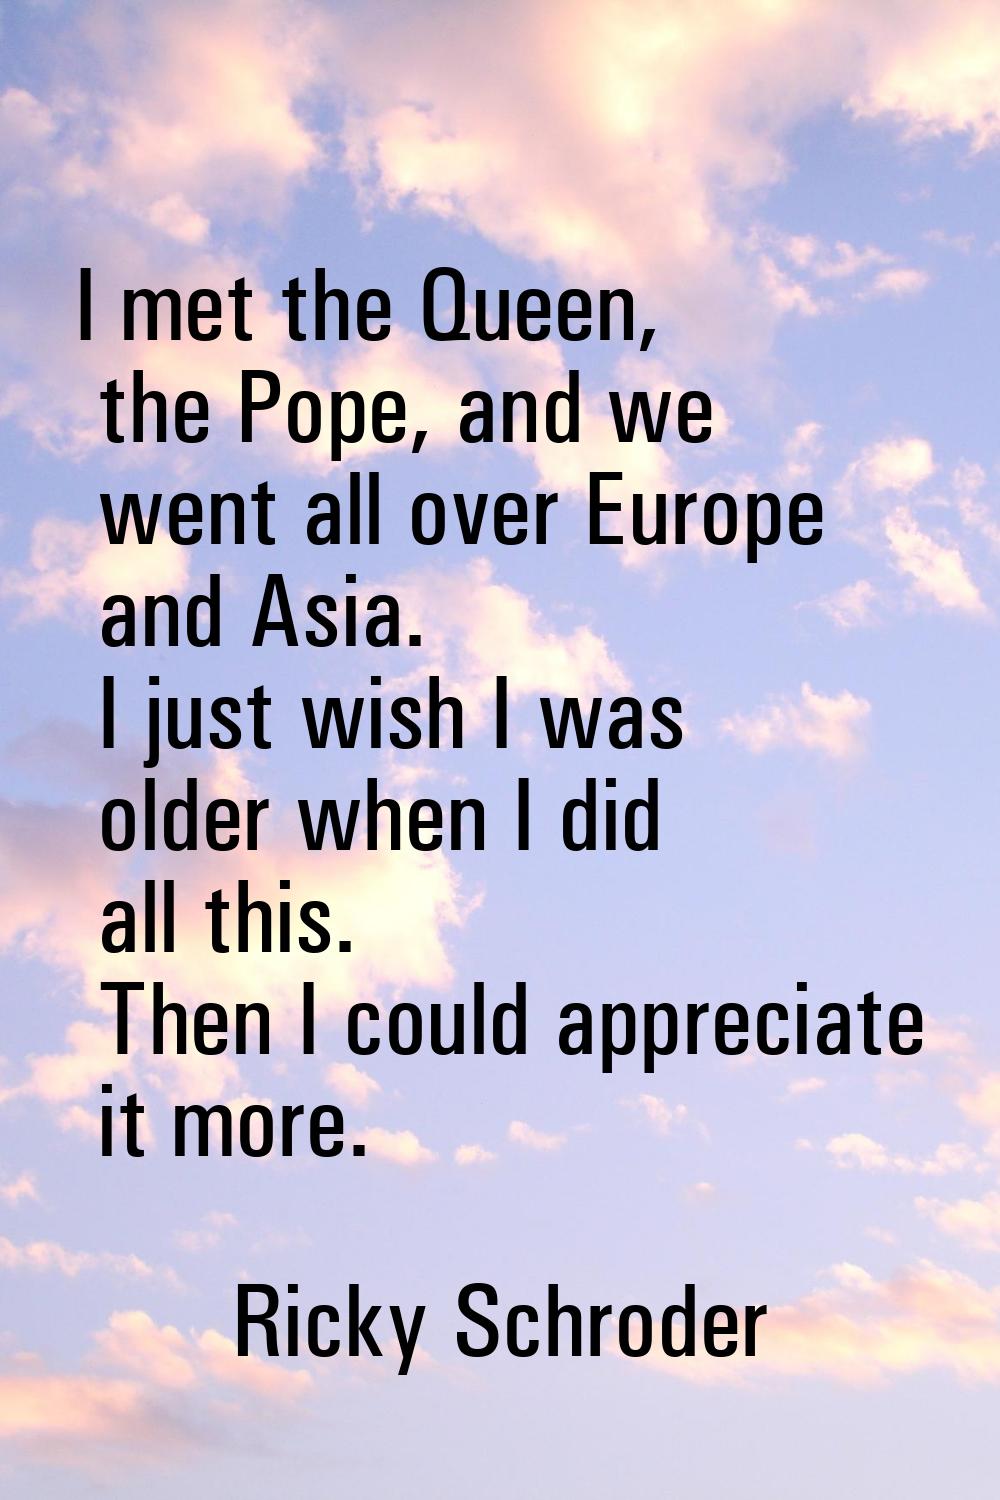 I met the Queen, the Pope, and we went all over Europe and Asia. I just wish I was older when I did